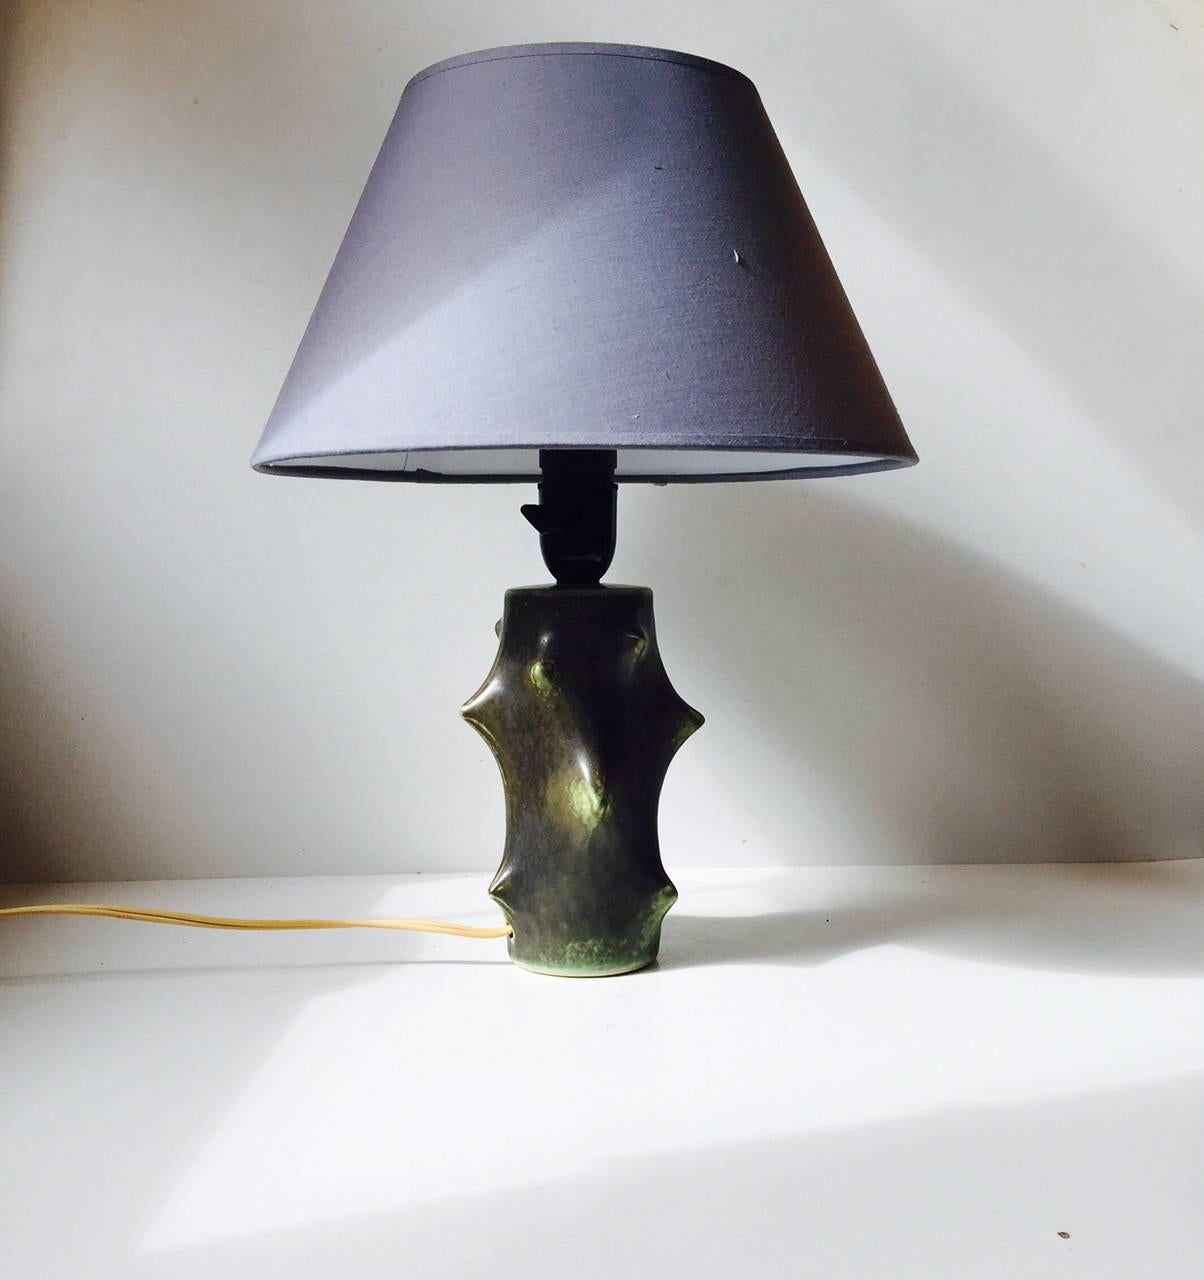 The Rose Thorn table lamp was designed by Knud Basse. It was manufactured in Denmark by Michael Andersen & Son during the 1950s. It features a warm black colored glaze with light green glaze peeking out here and there. The huge popularity of the